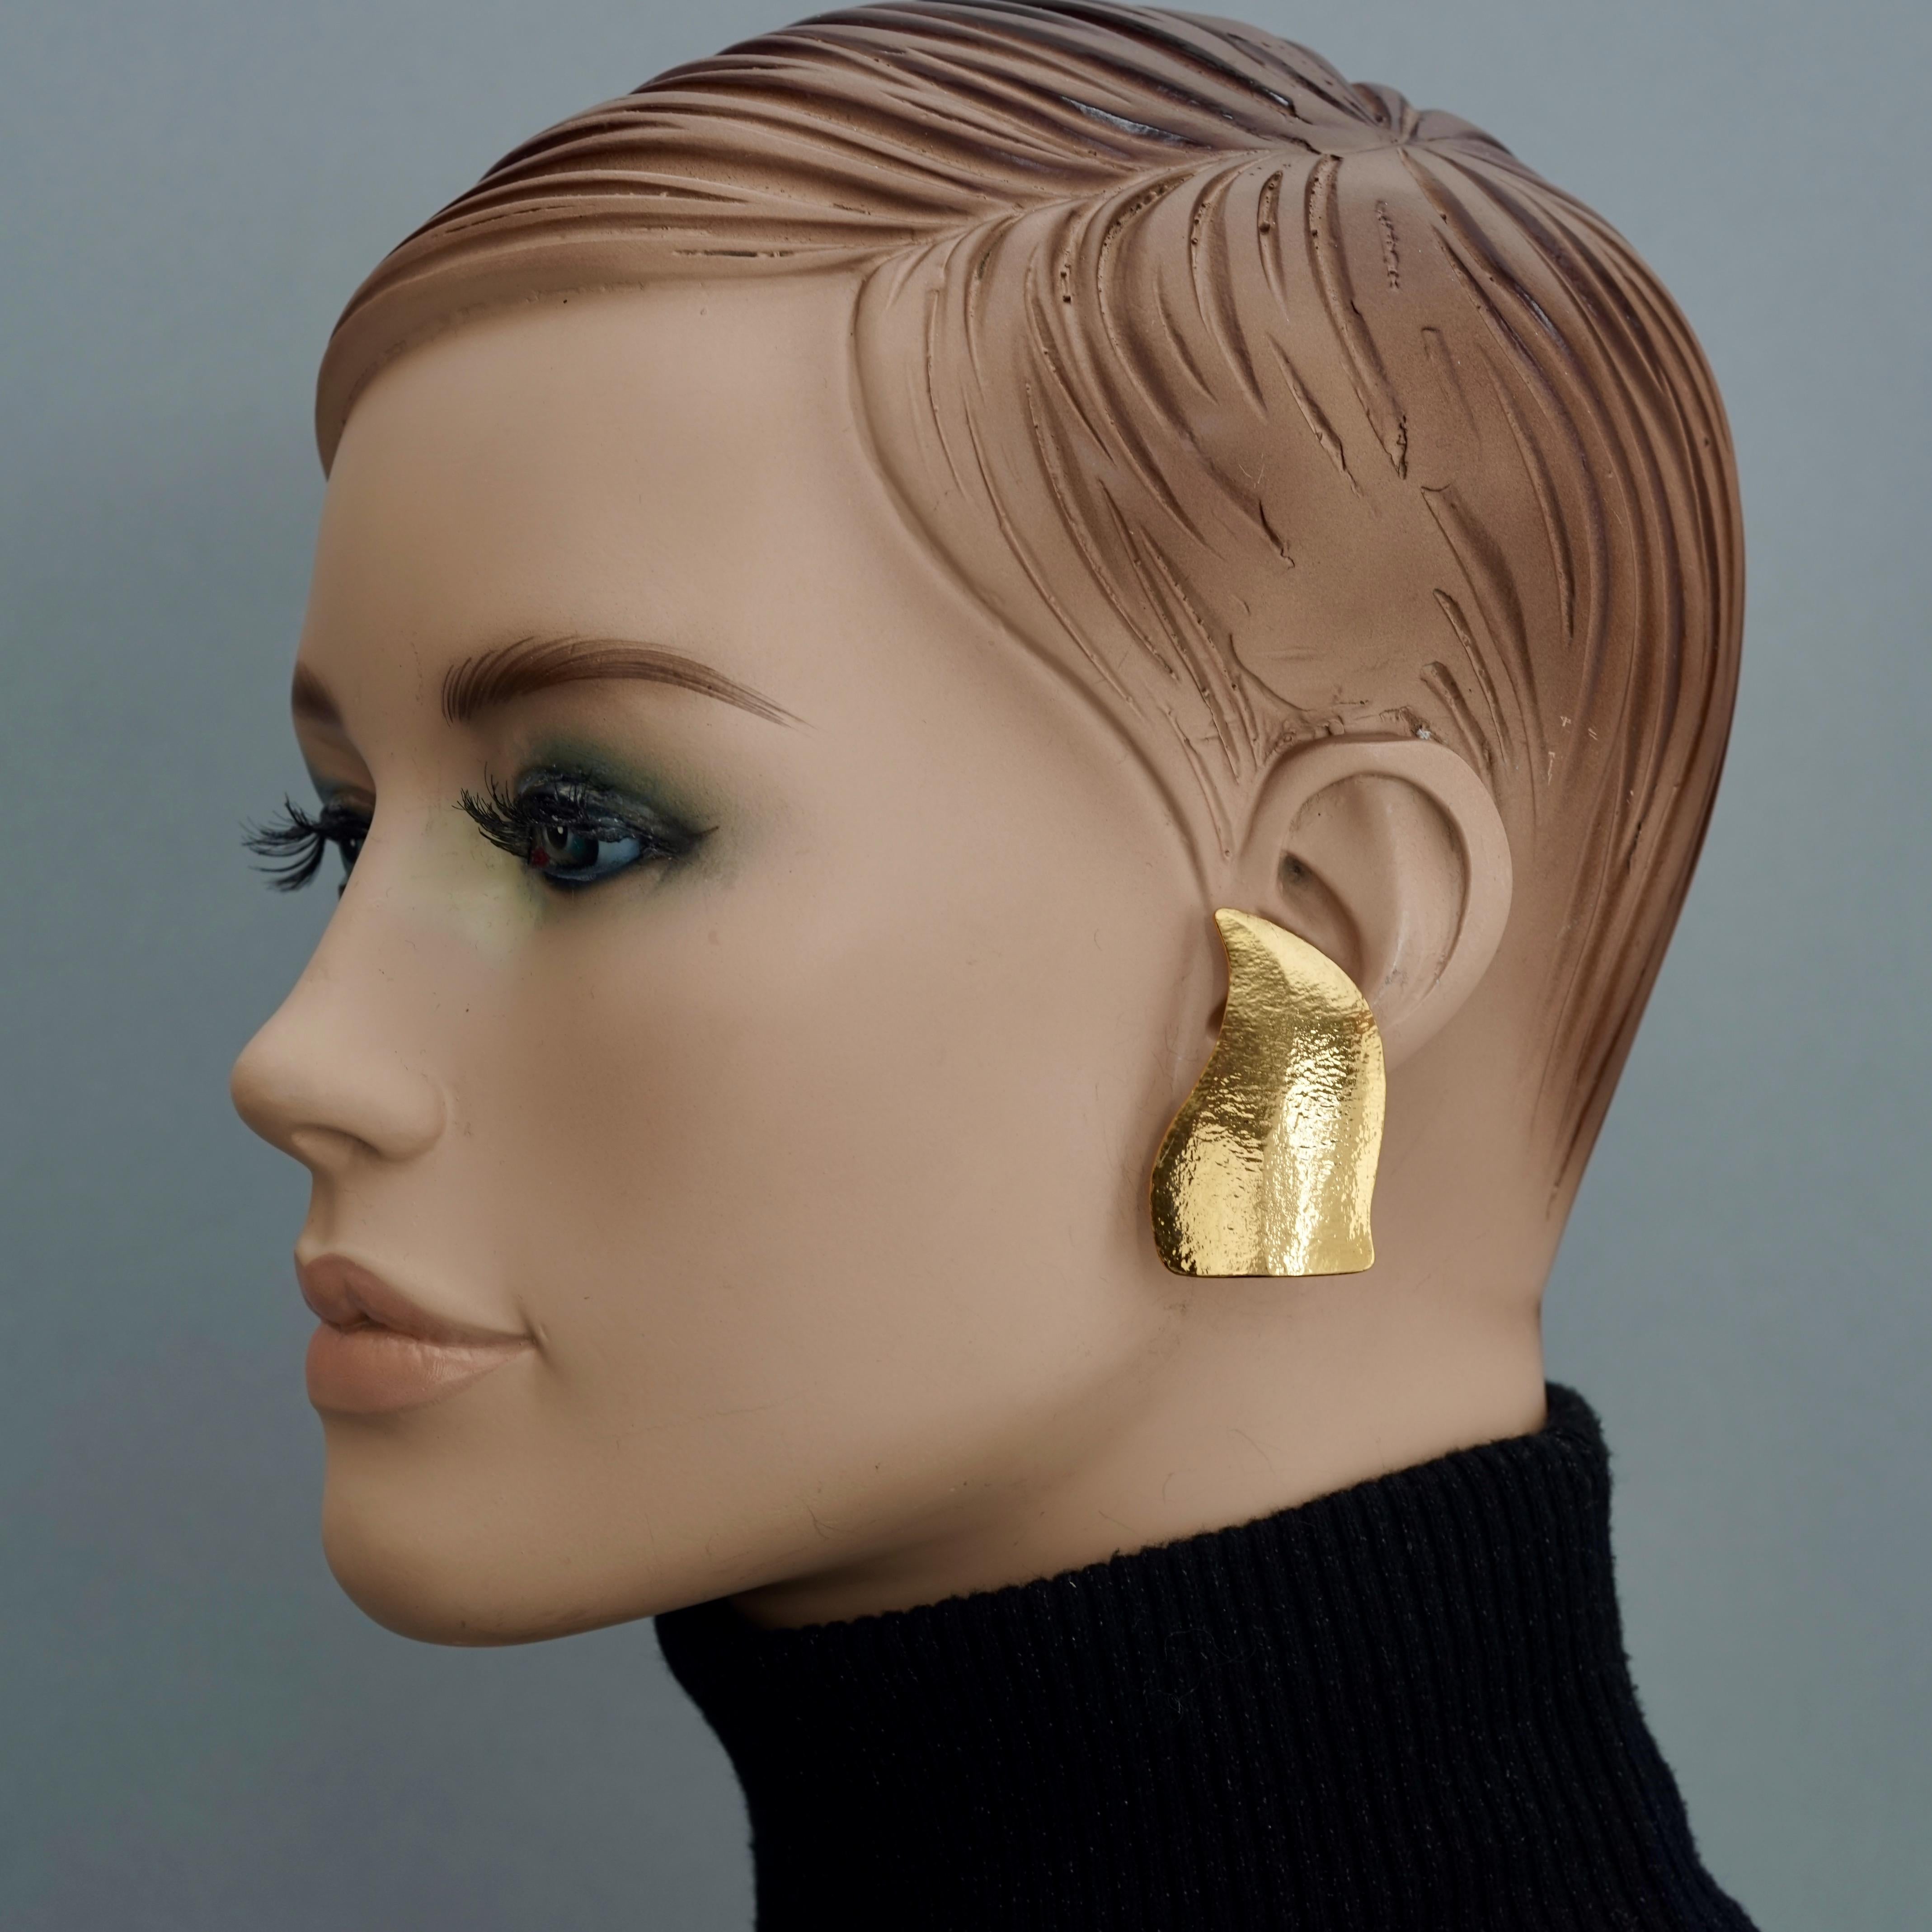 Vintage YVES SAINT LAURENT Ysl by Robert Goossens Flame Earrings

Measurements:
Height: 1.38 inches (3.5 cm)
Width: 1.38 inches (3.5 cm)
Weight per Earring: 18 grams

Features:
- 100% Authentic YVES SAINT LAURENT by Robert Goossens.
- Textured flame